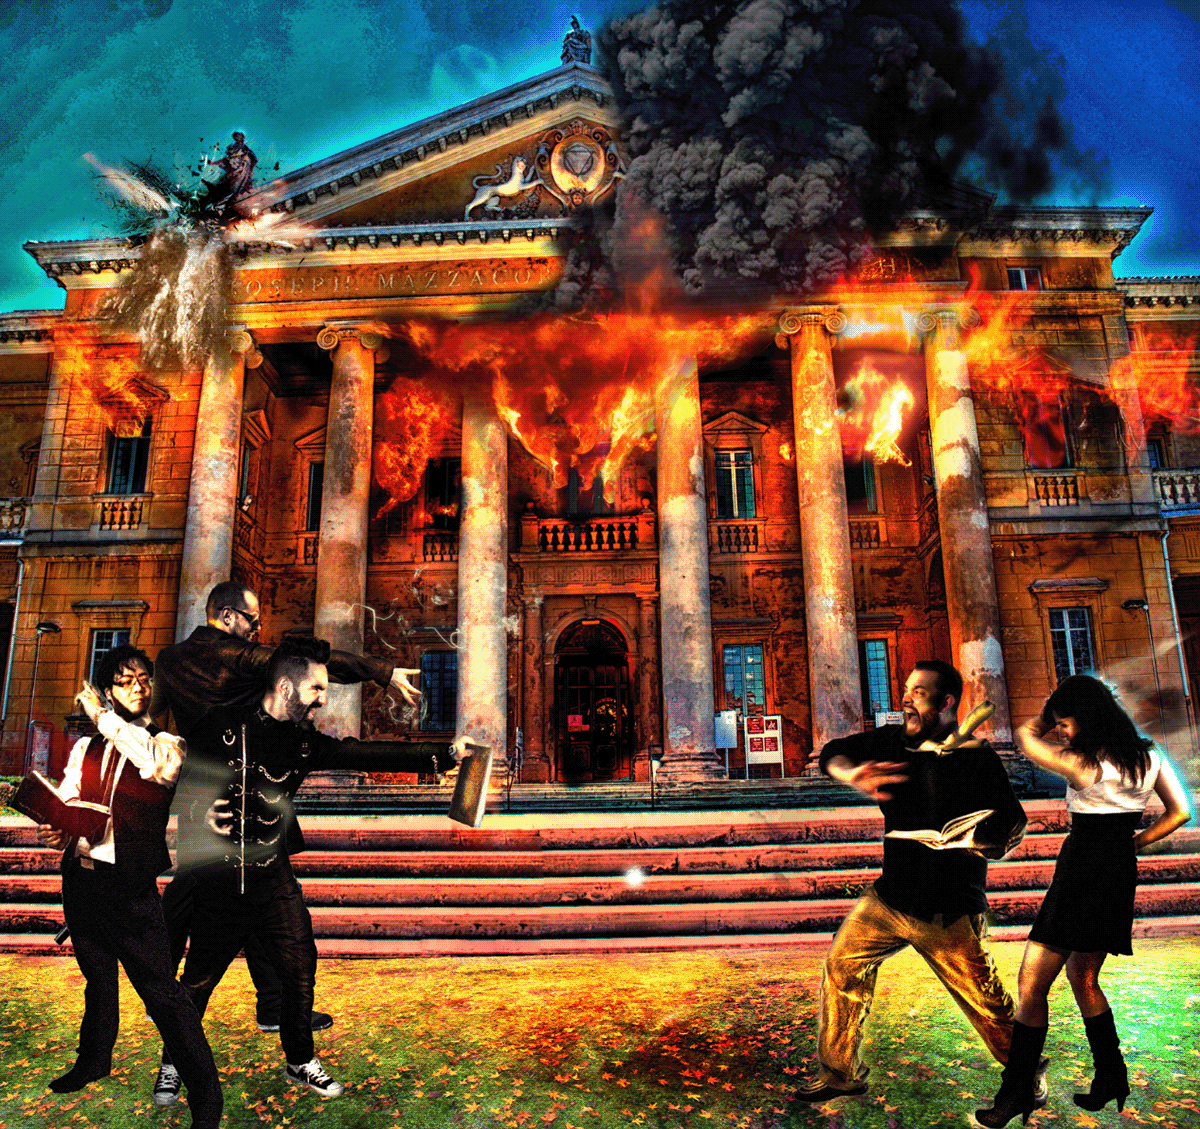 battle Magic   Spells casting spellcasting photomanipulation fire energy abstract Wizards mage mansion explosion arcane